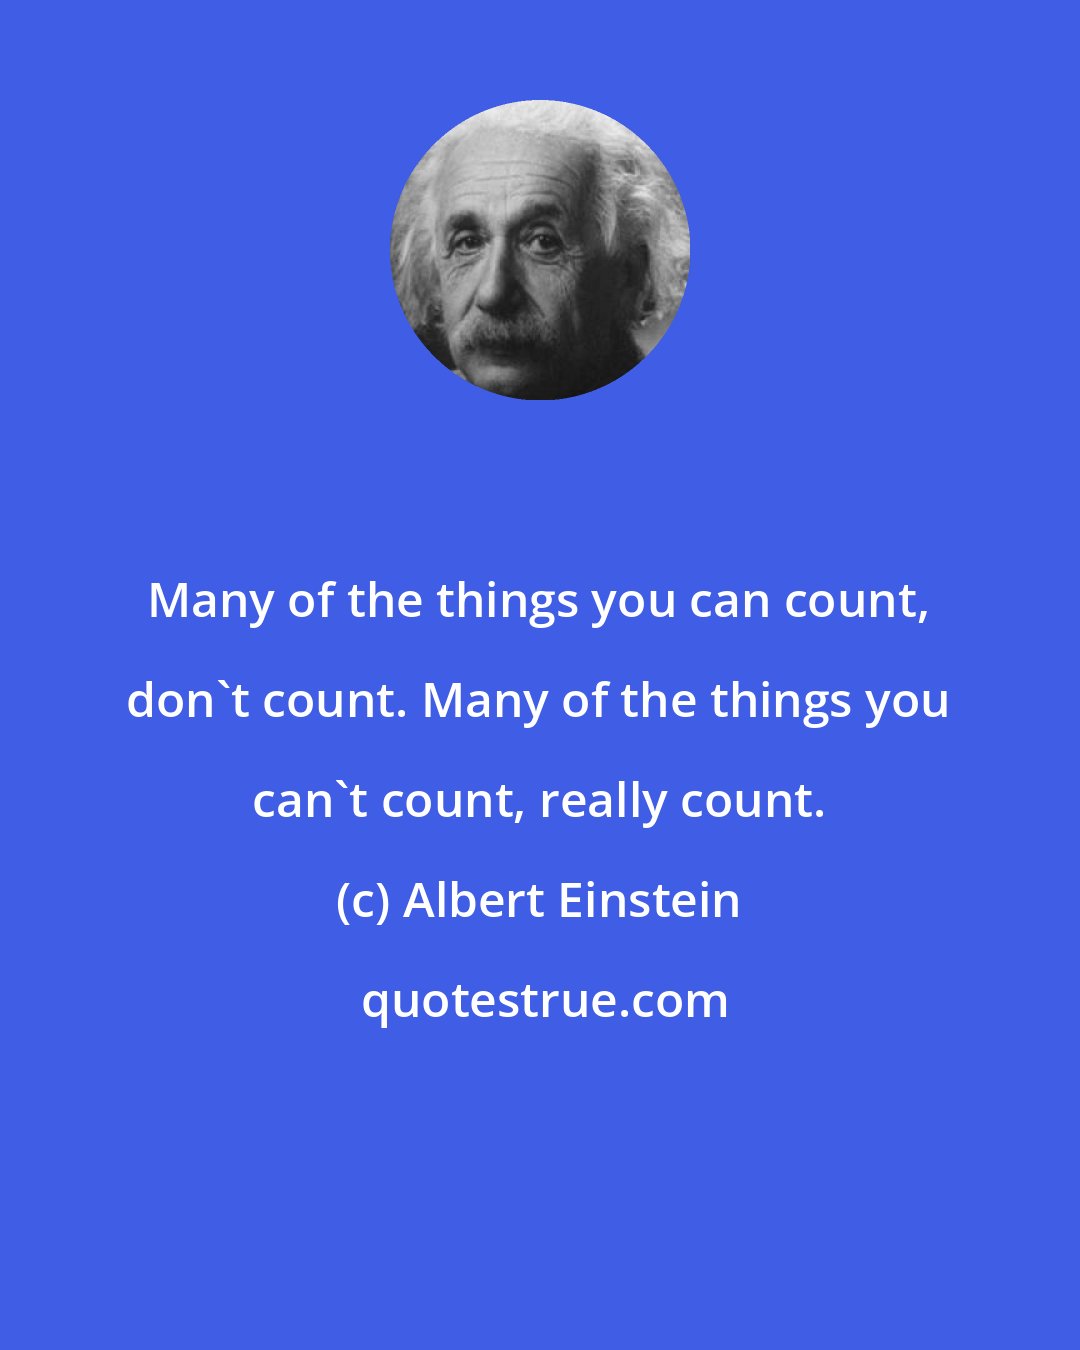 Albert Einstein: Many of the things you can count, don't count. Many of the things you can't count, really count.